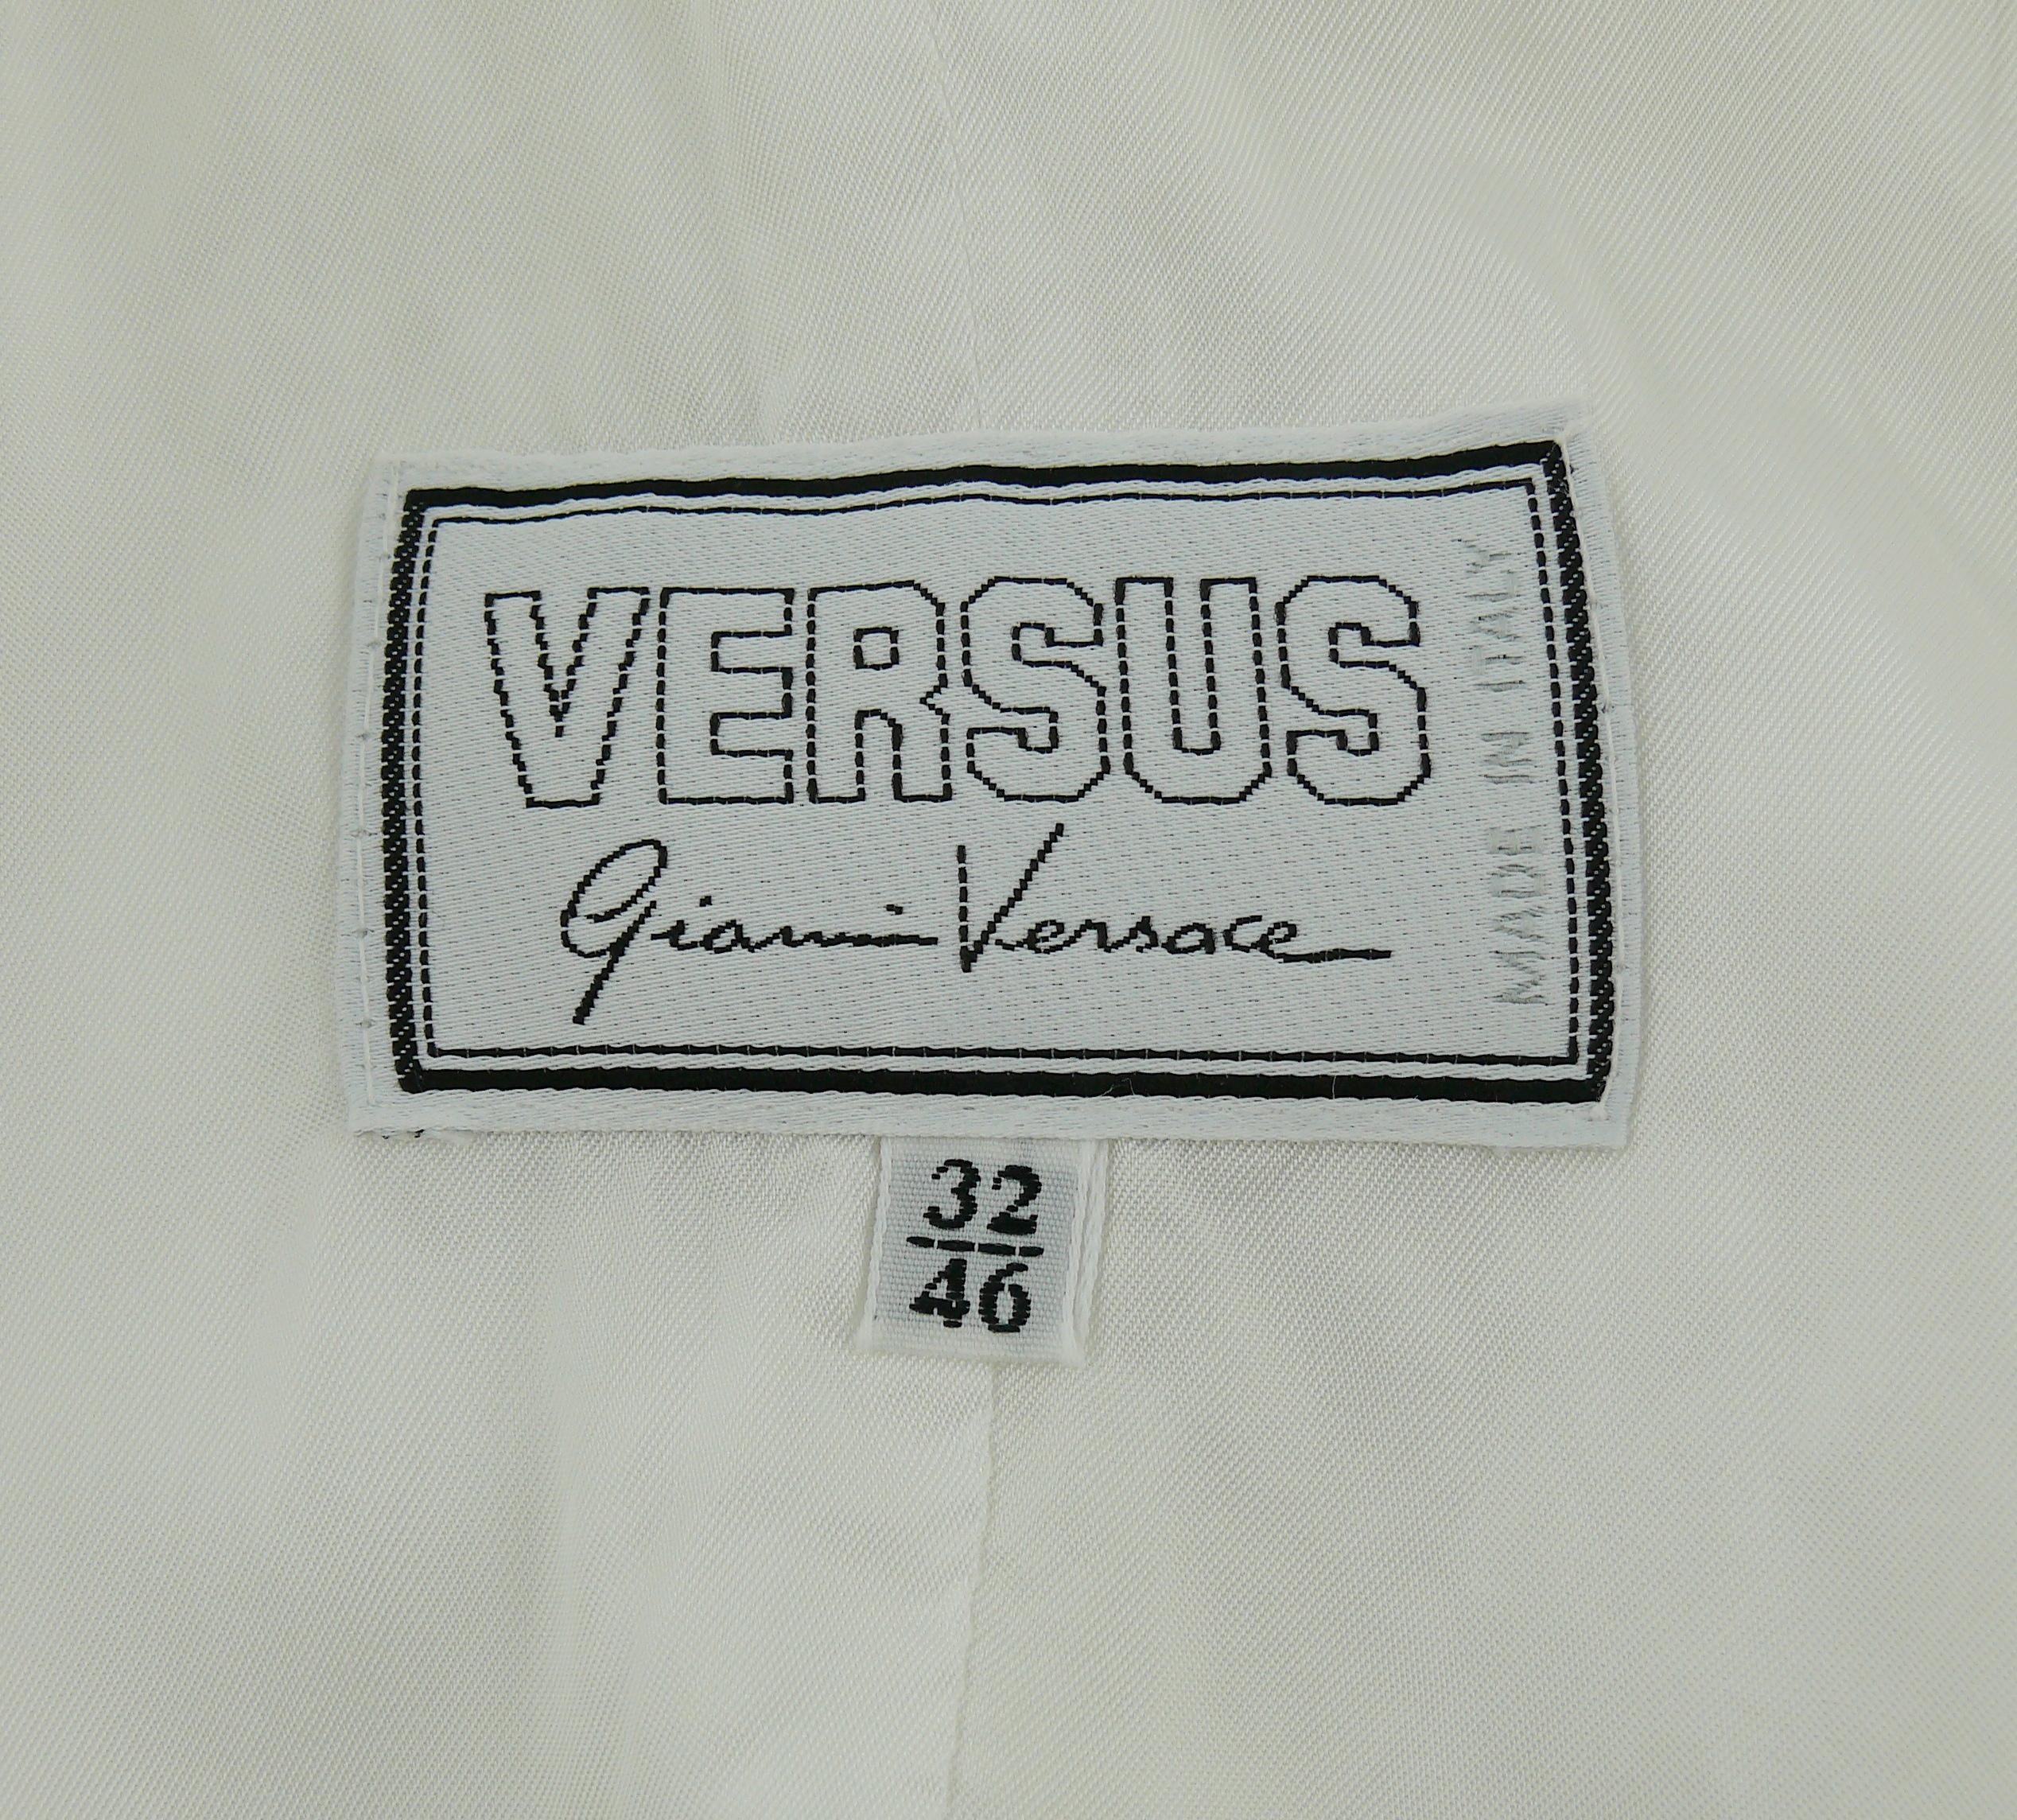 Gianni Versace Versus Vintage White Jacket & Skirt Ensemble with Western Details For Sale 3